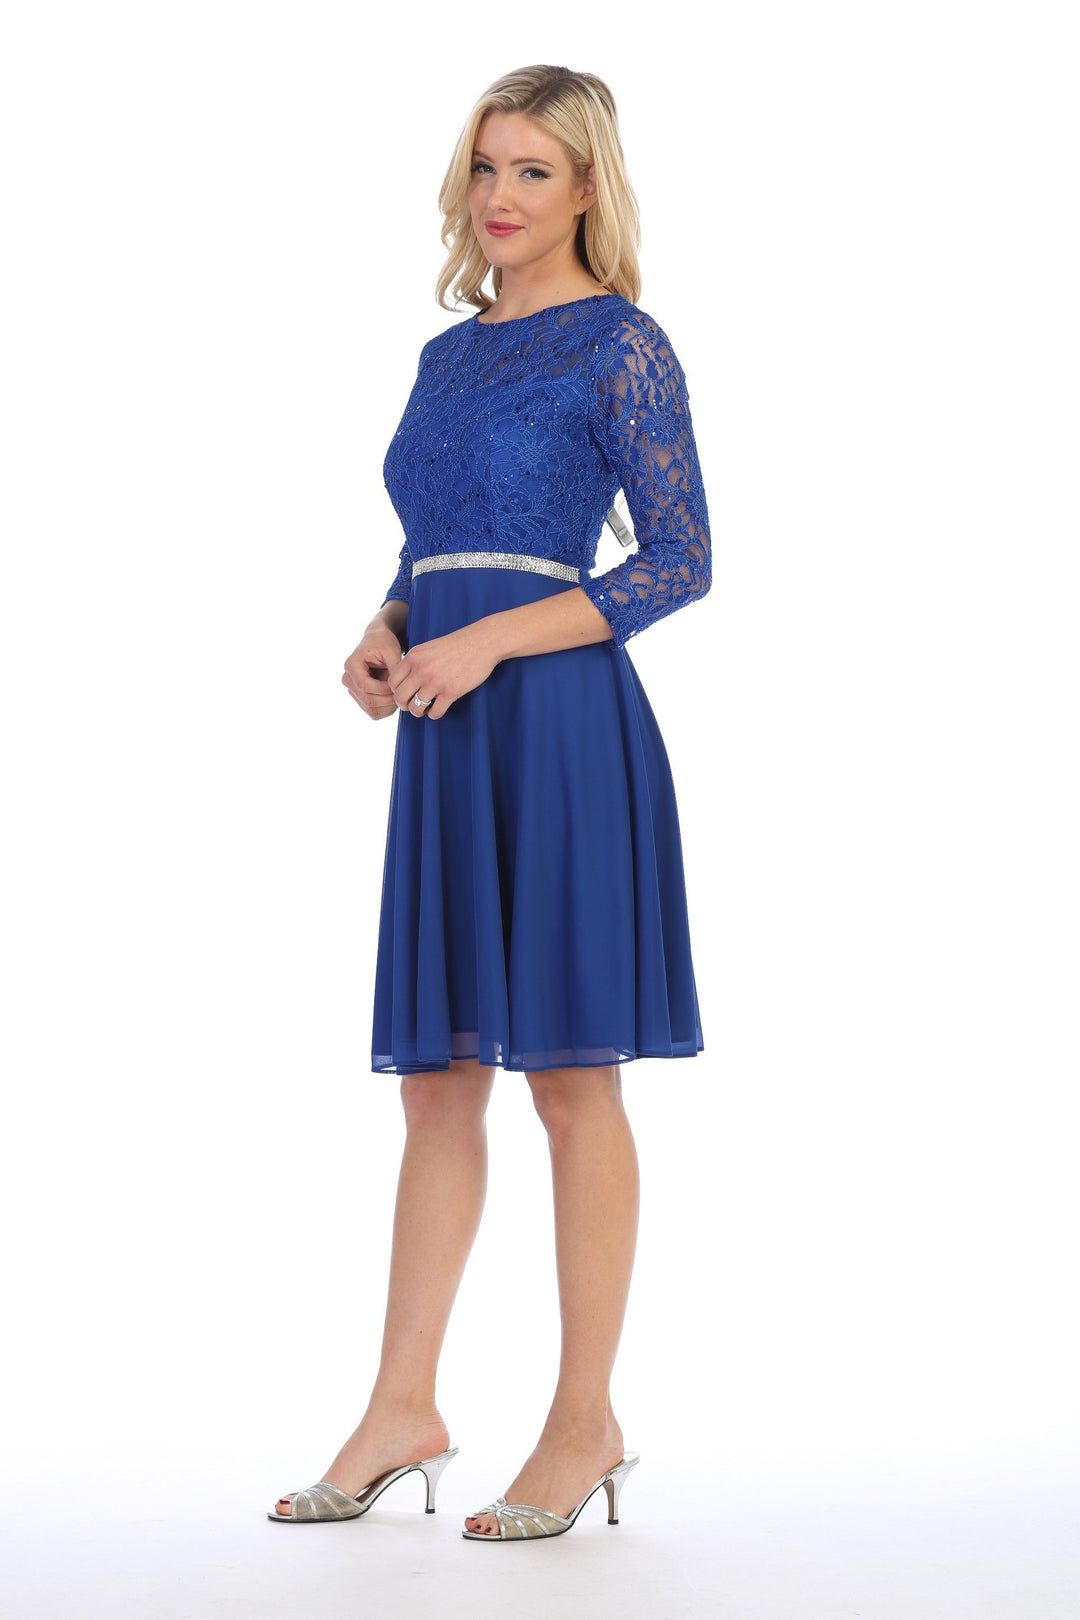 Short Lace Bodice Dress with Long Sleeves by Celavie 6305-S-Short Cocktail Dresses-ABC Fashion